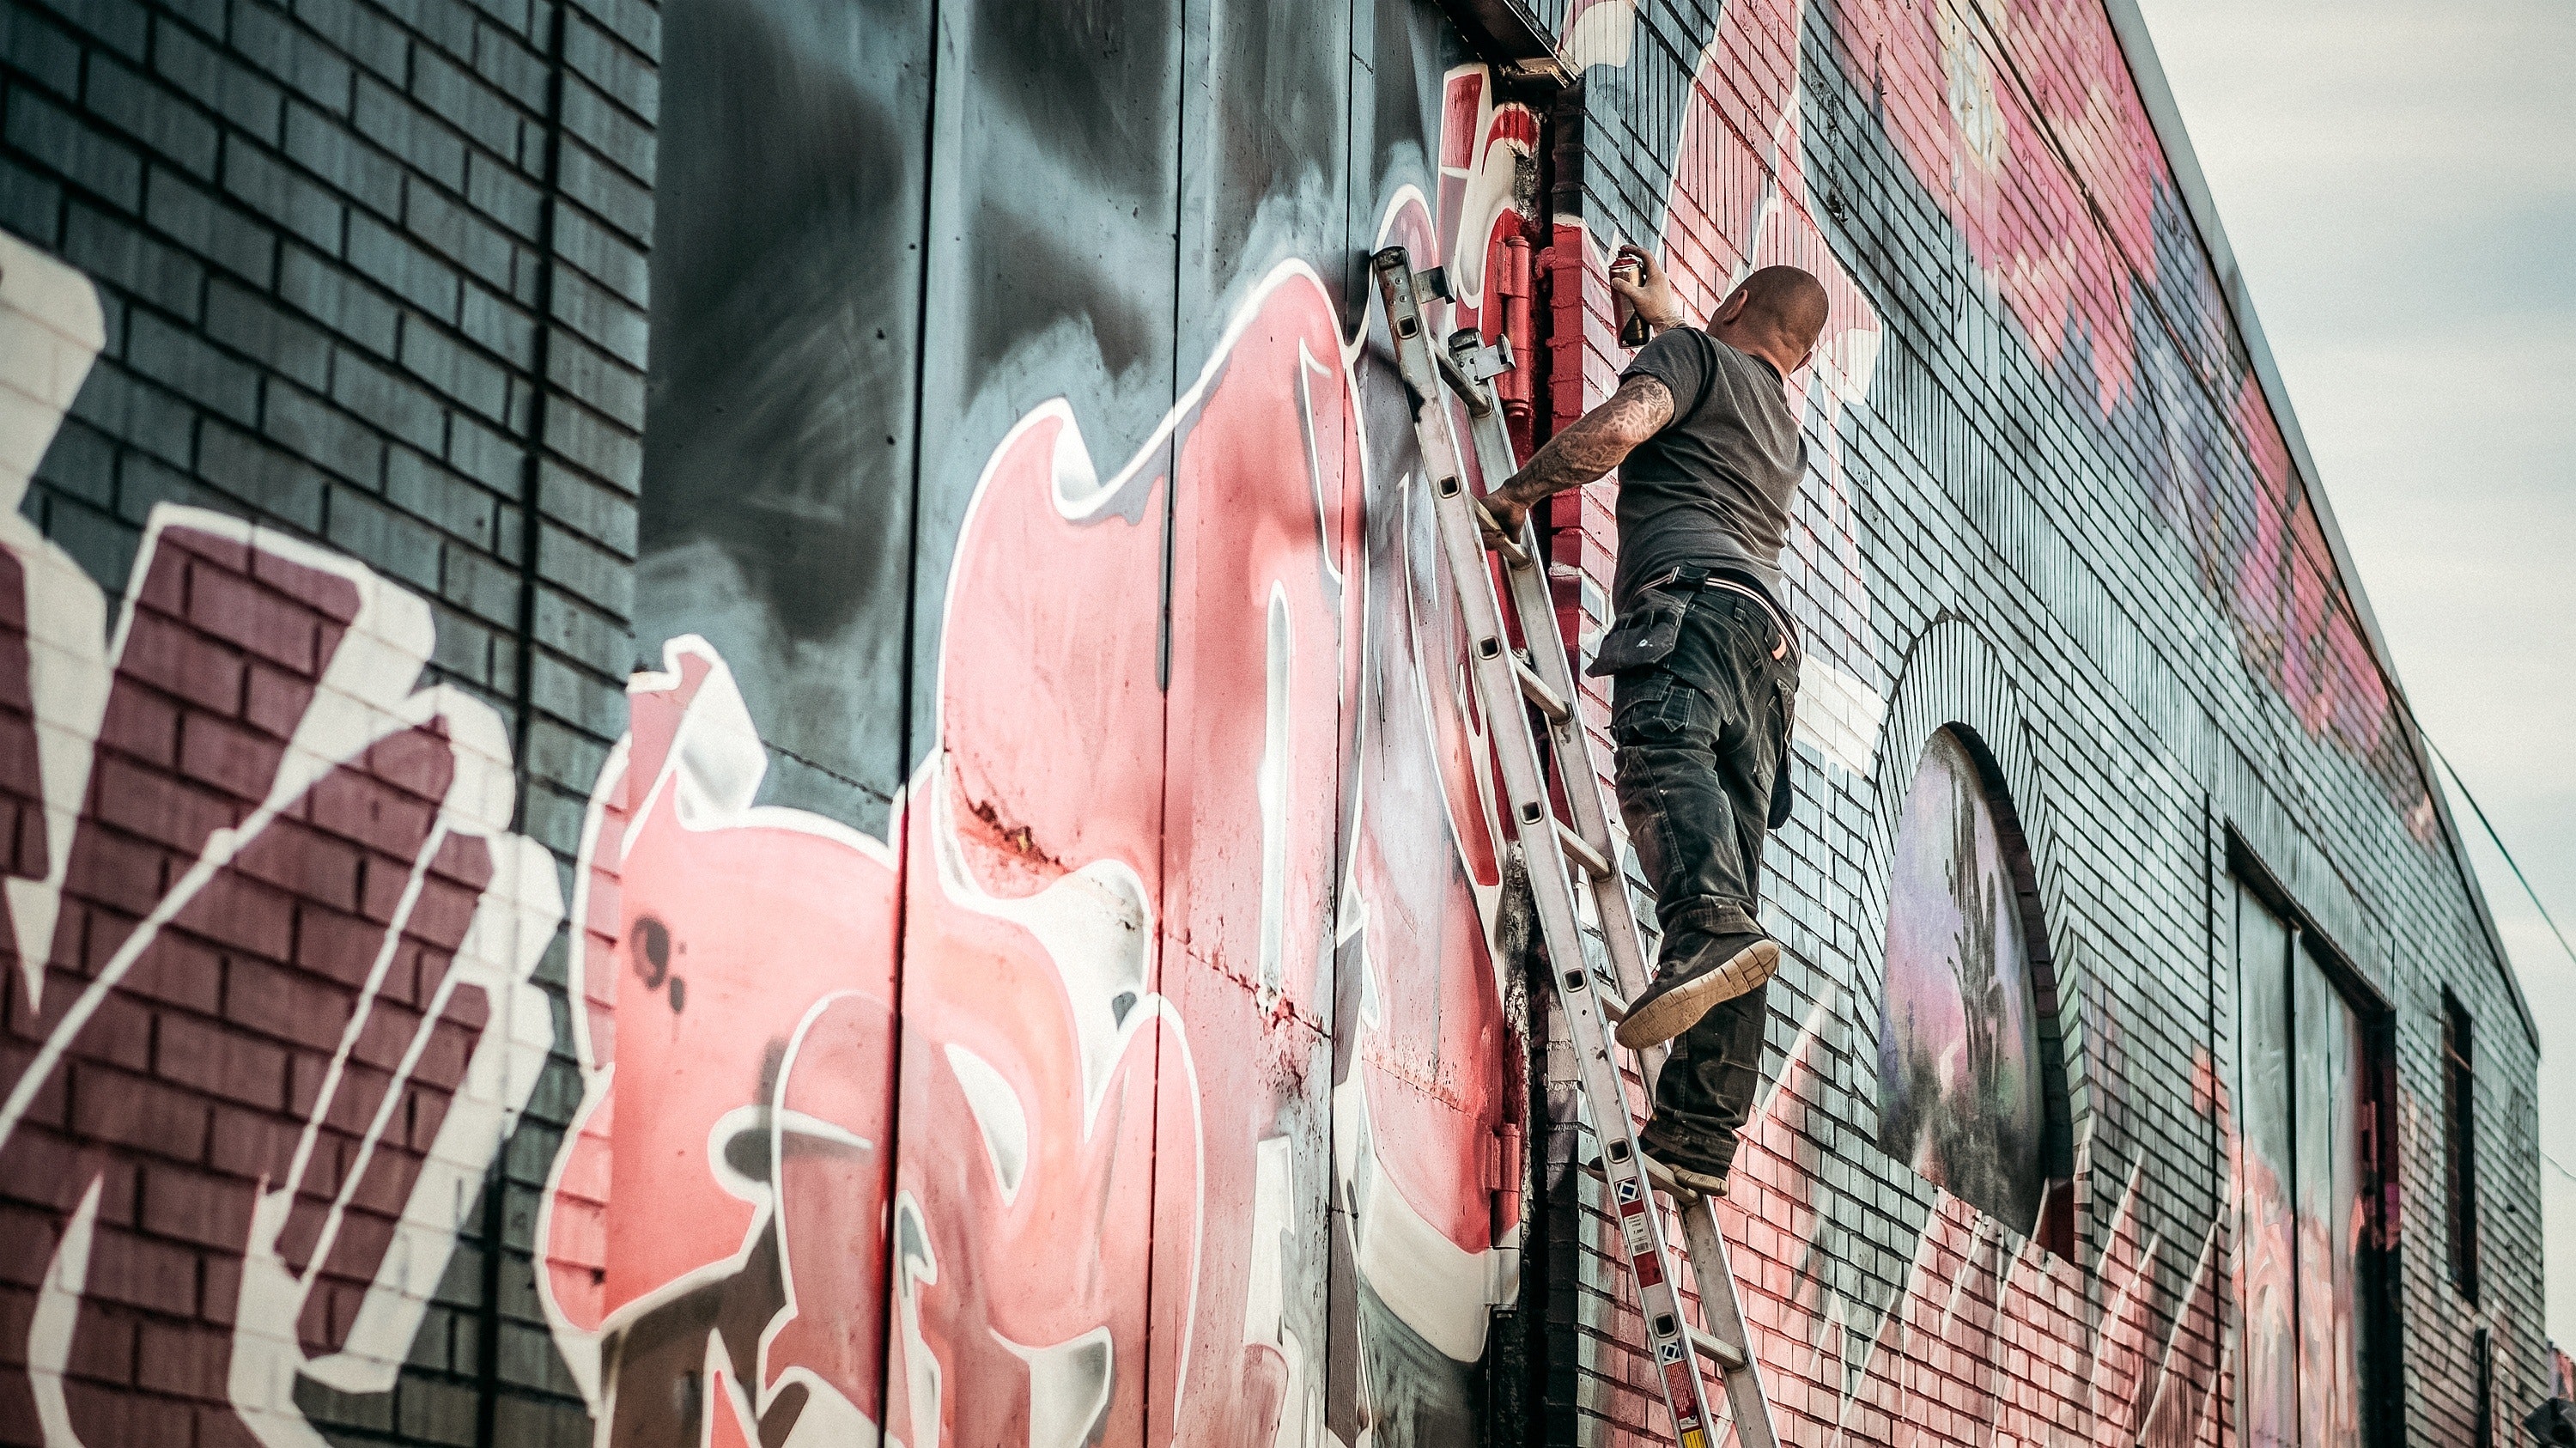 Man in gray shirt standing on gray steel ladder painting black white and red graffiti on concrete wall outdoors photo